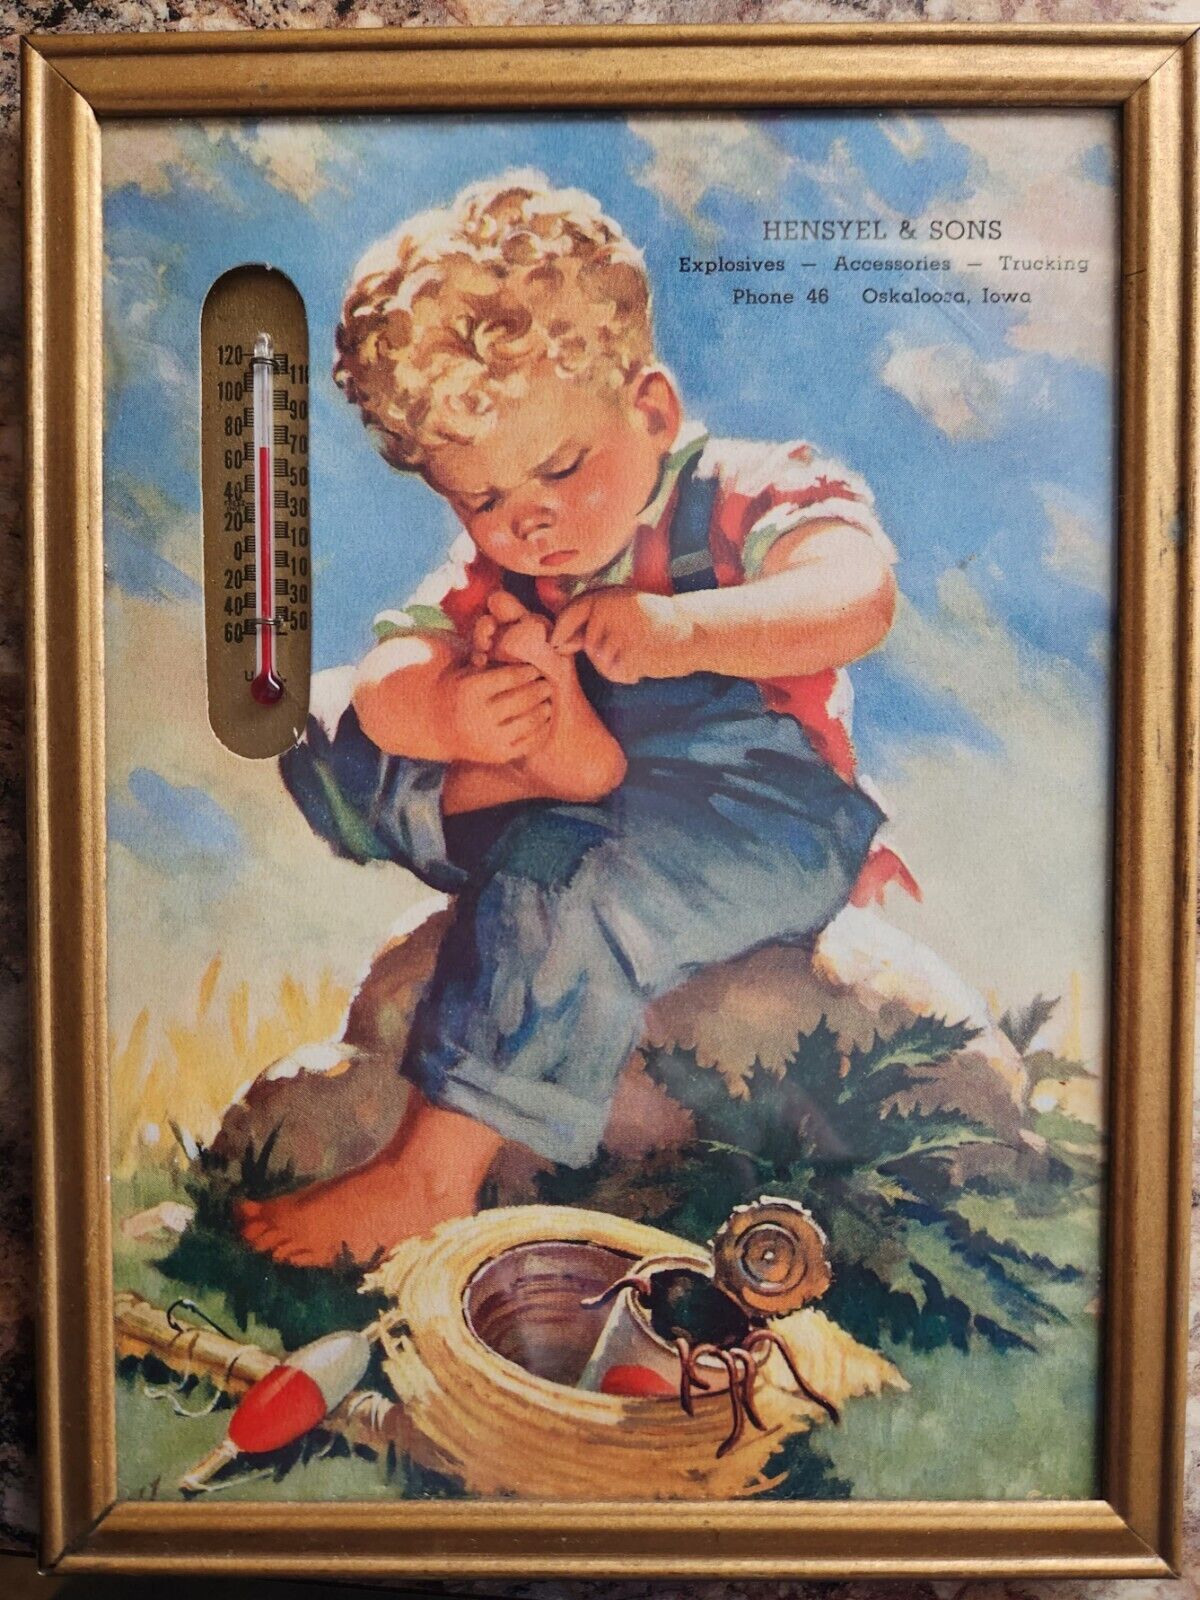 1949 Vintage Thermometer Advertising Framed Picture Hensyel & Sons Oskaloosa Ia